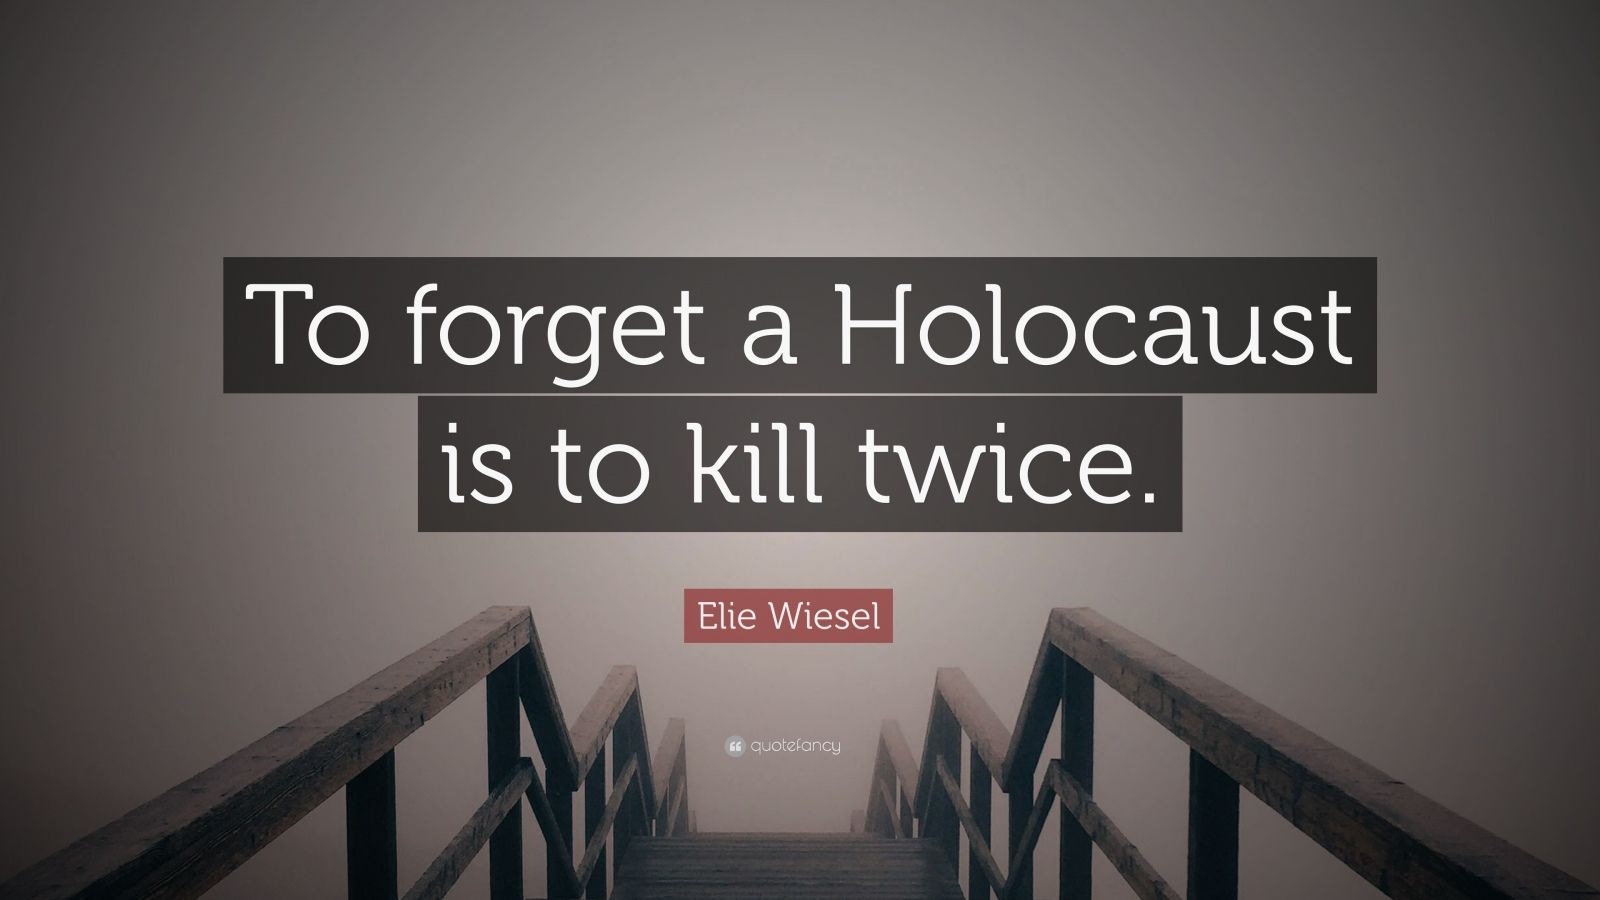 elie wiesel quotes about the holocaust